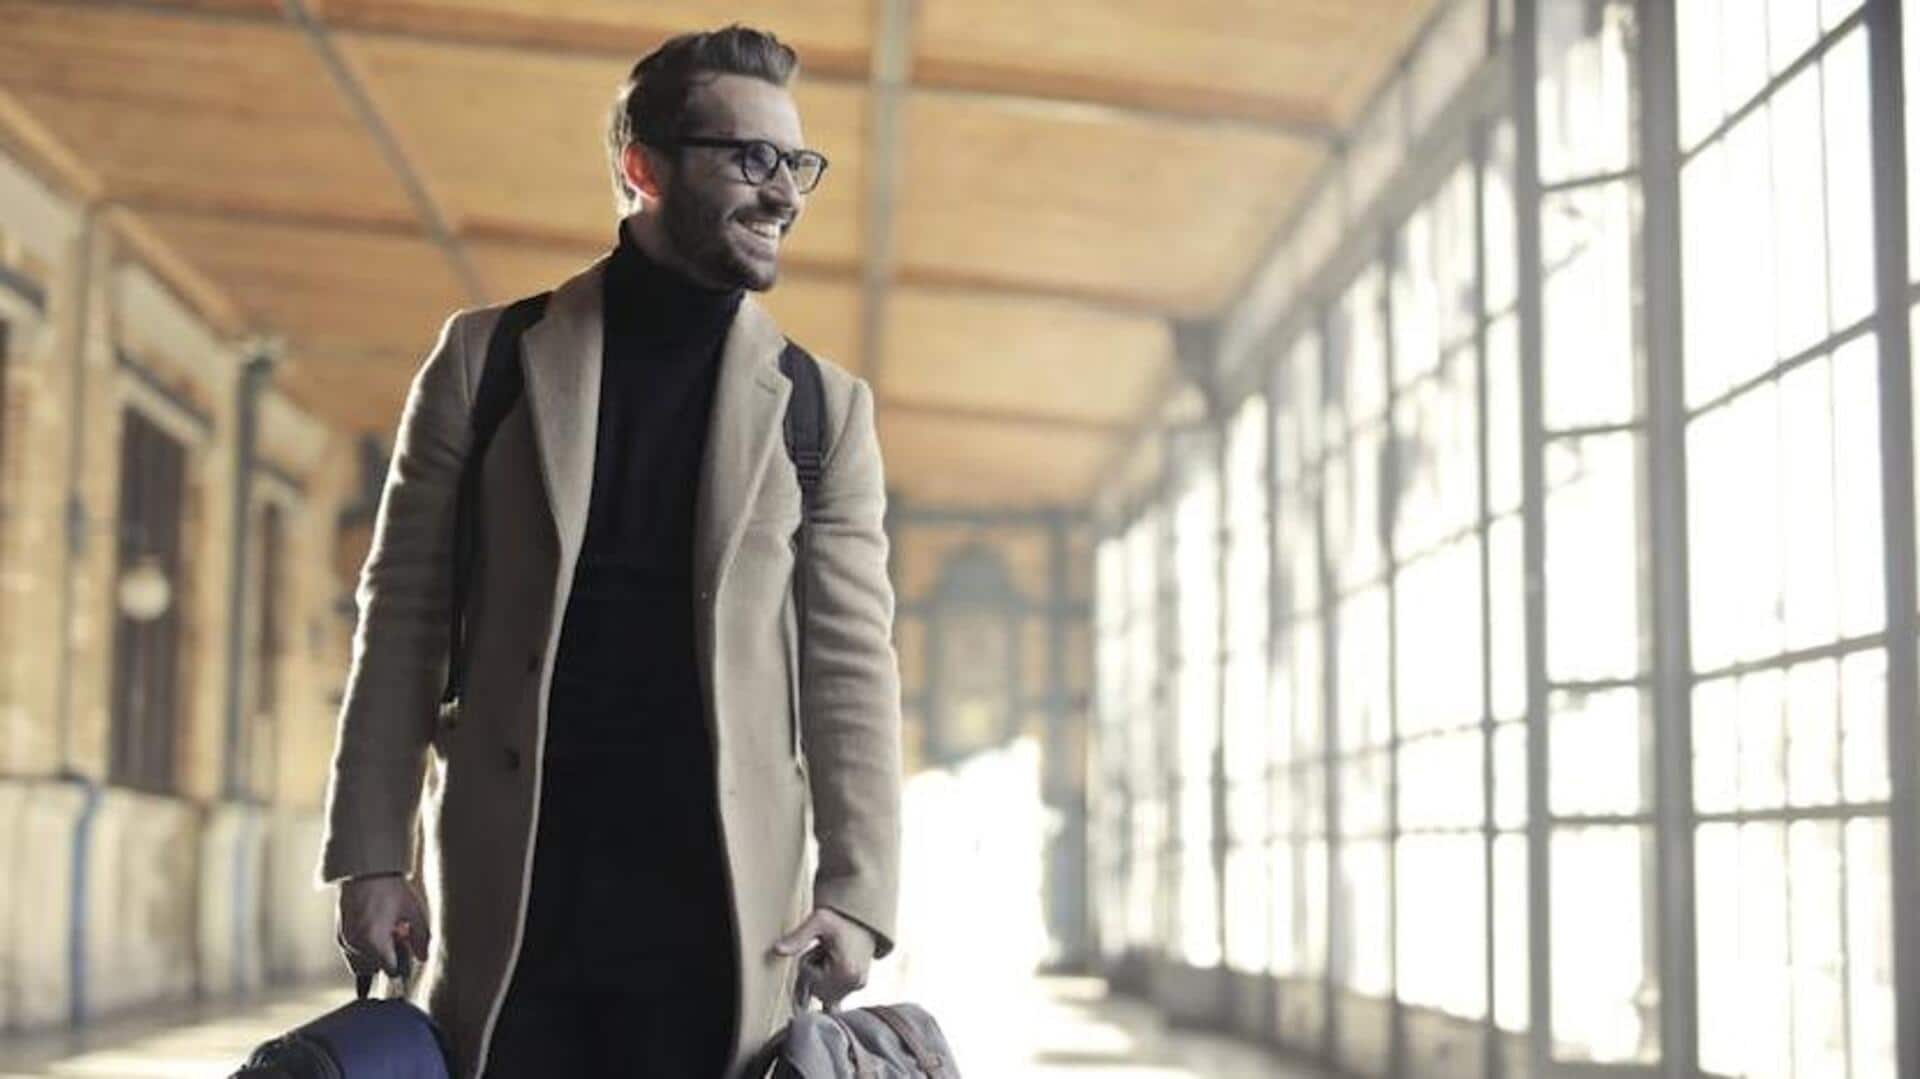 Winter office wear: Eco-friendly clothing that is sustainable and stylish